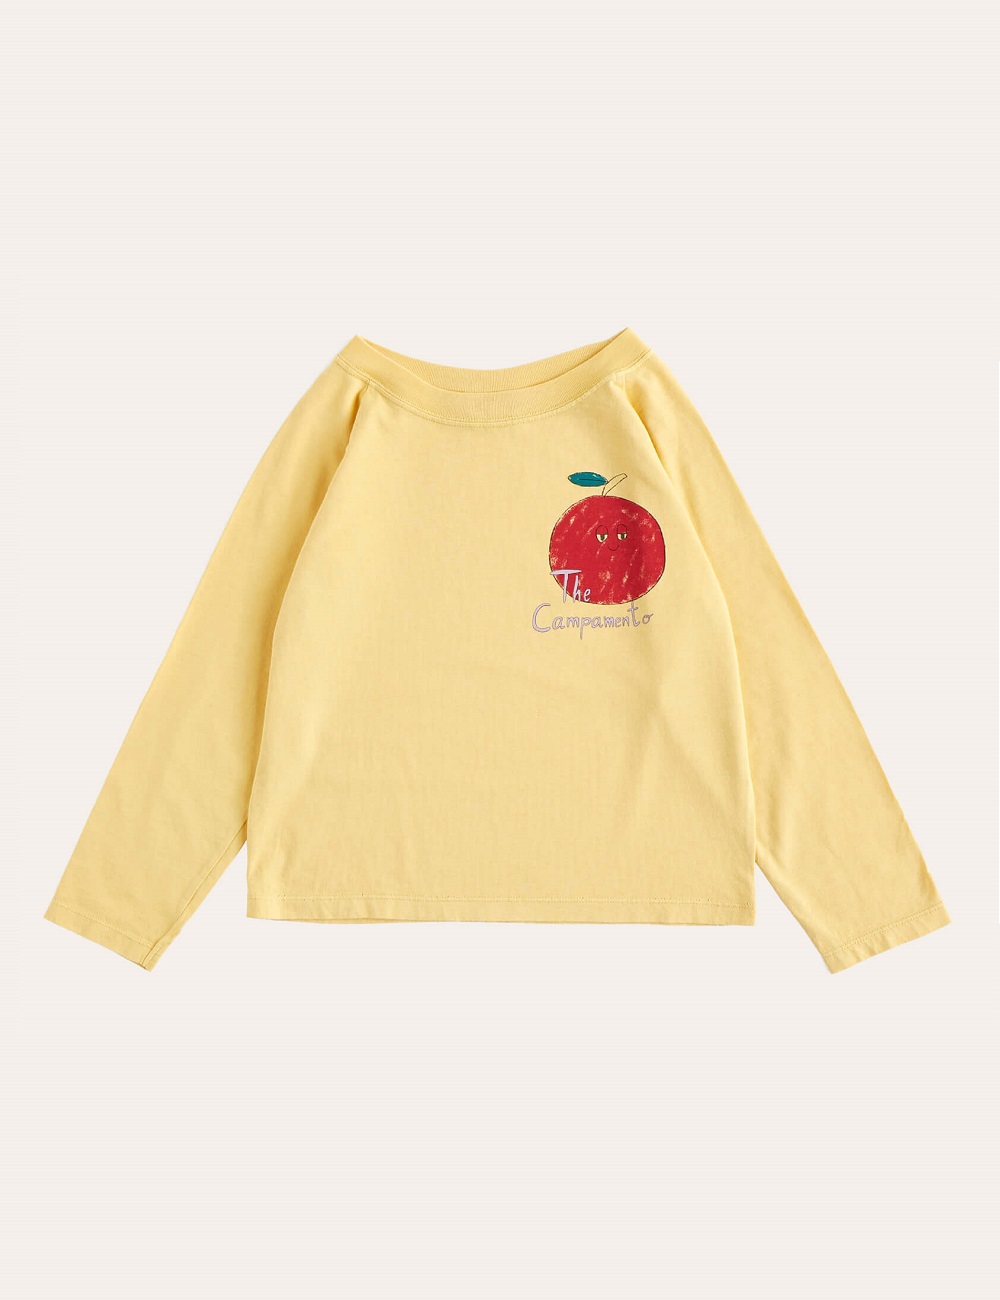 [AW22 THE CAMPAMENTO] APPLE T-SHIRT